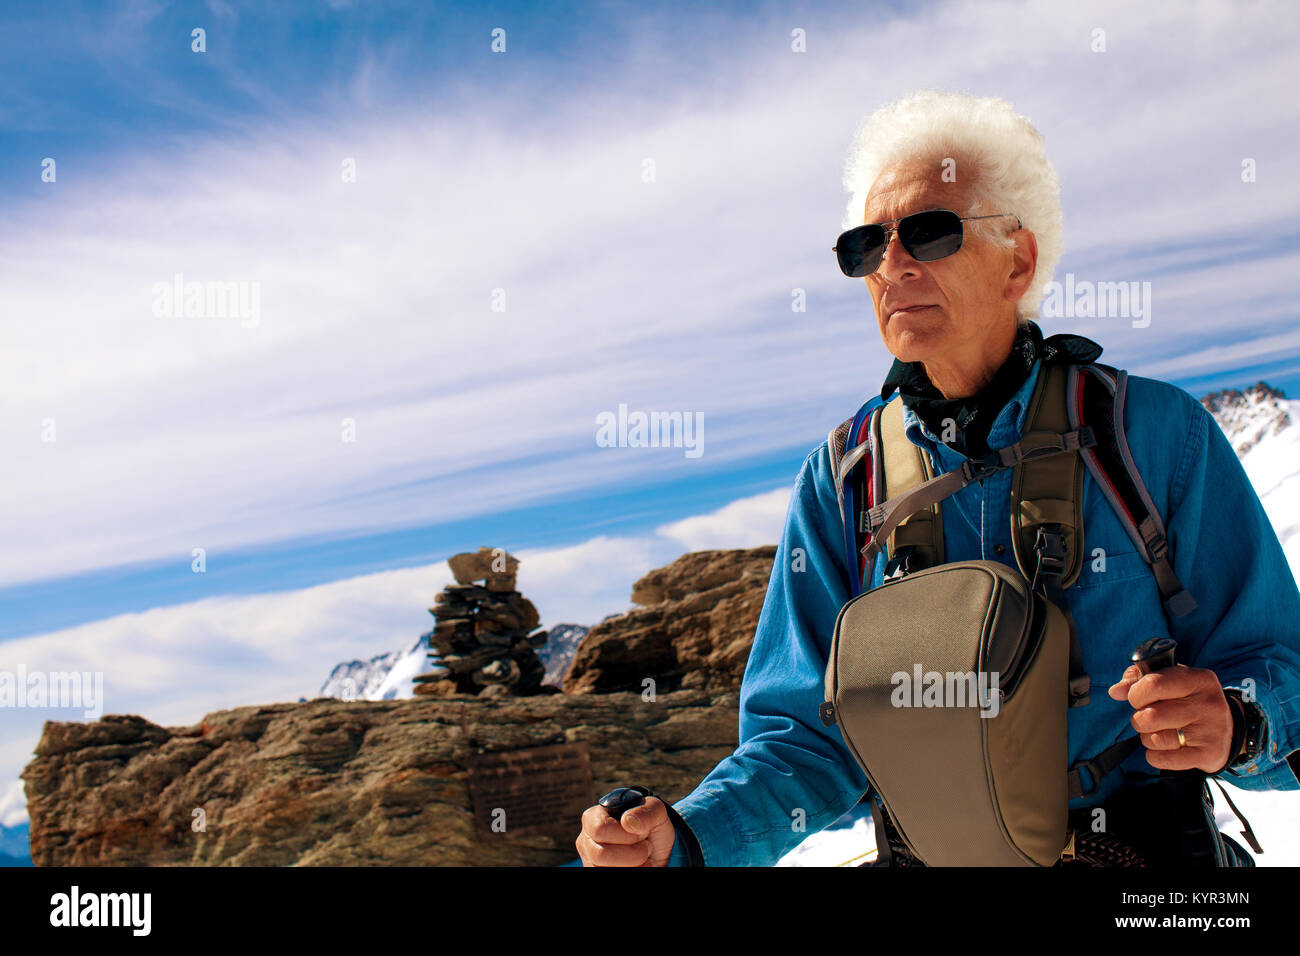 Senior man hiking in the mountains on adventure travel trip to the Swiss Alps. Wearing sunglasses, camera bag, trekking poles. Copy space. Stock Photo